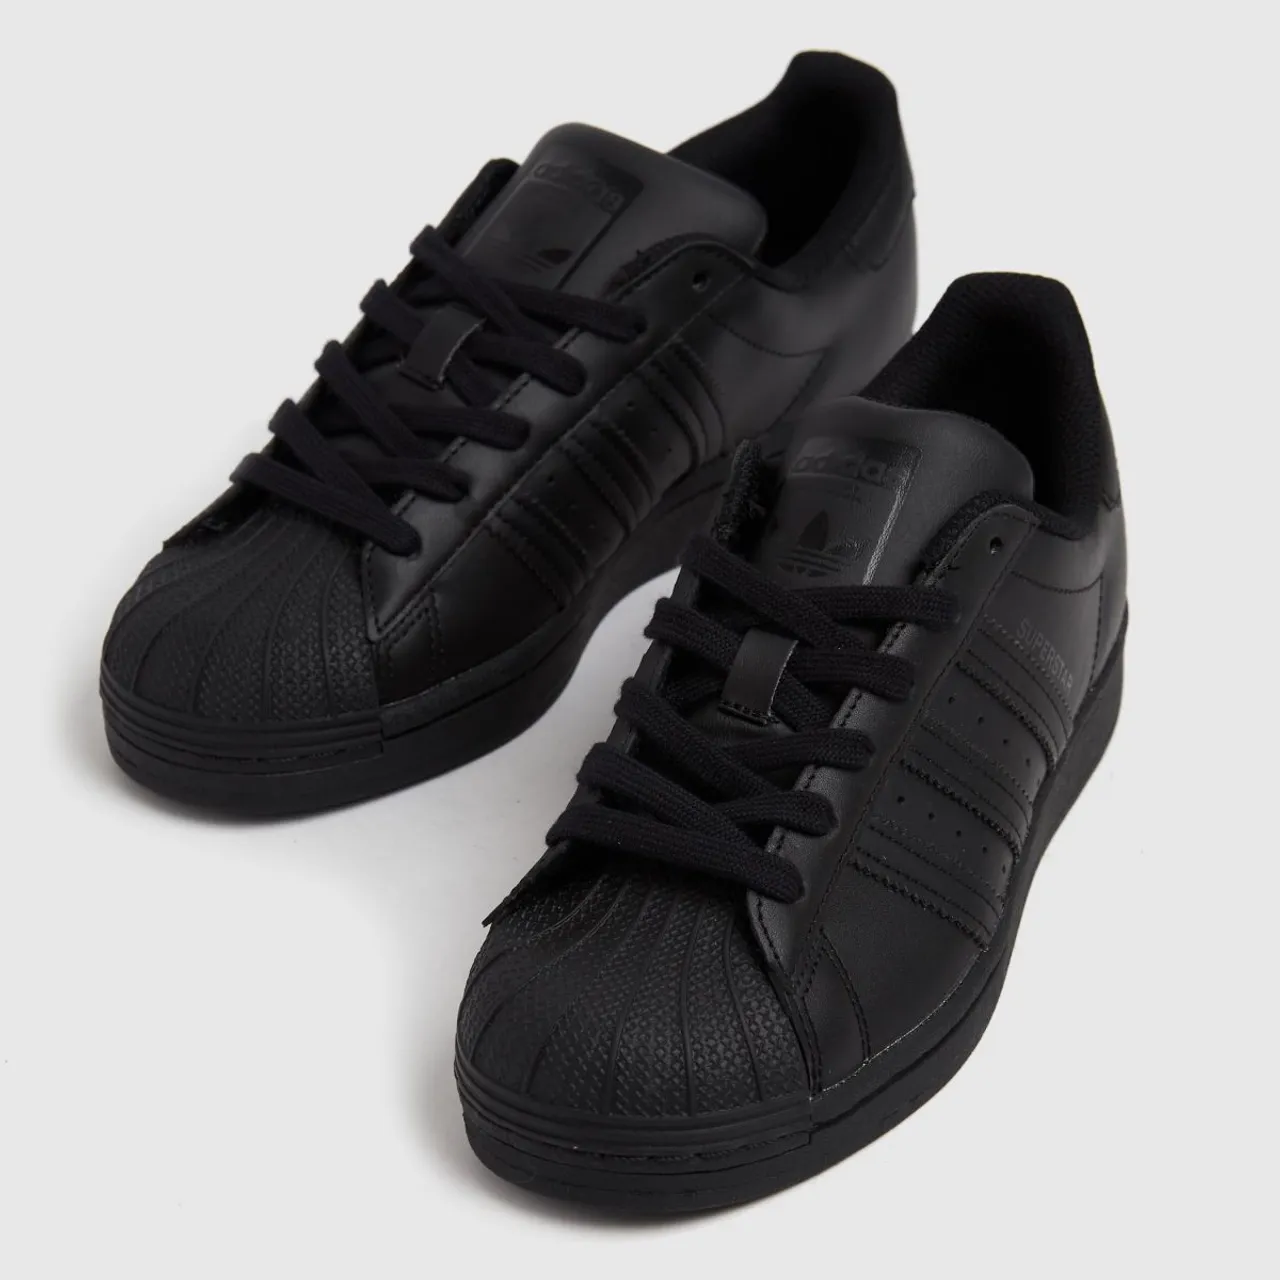 Adidas Black Superstar Youth Trainers